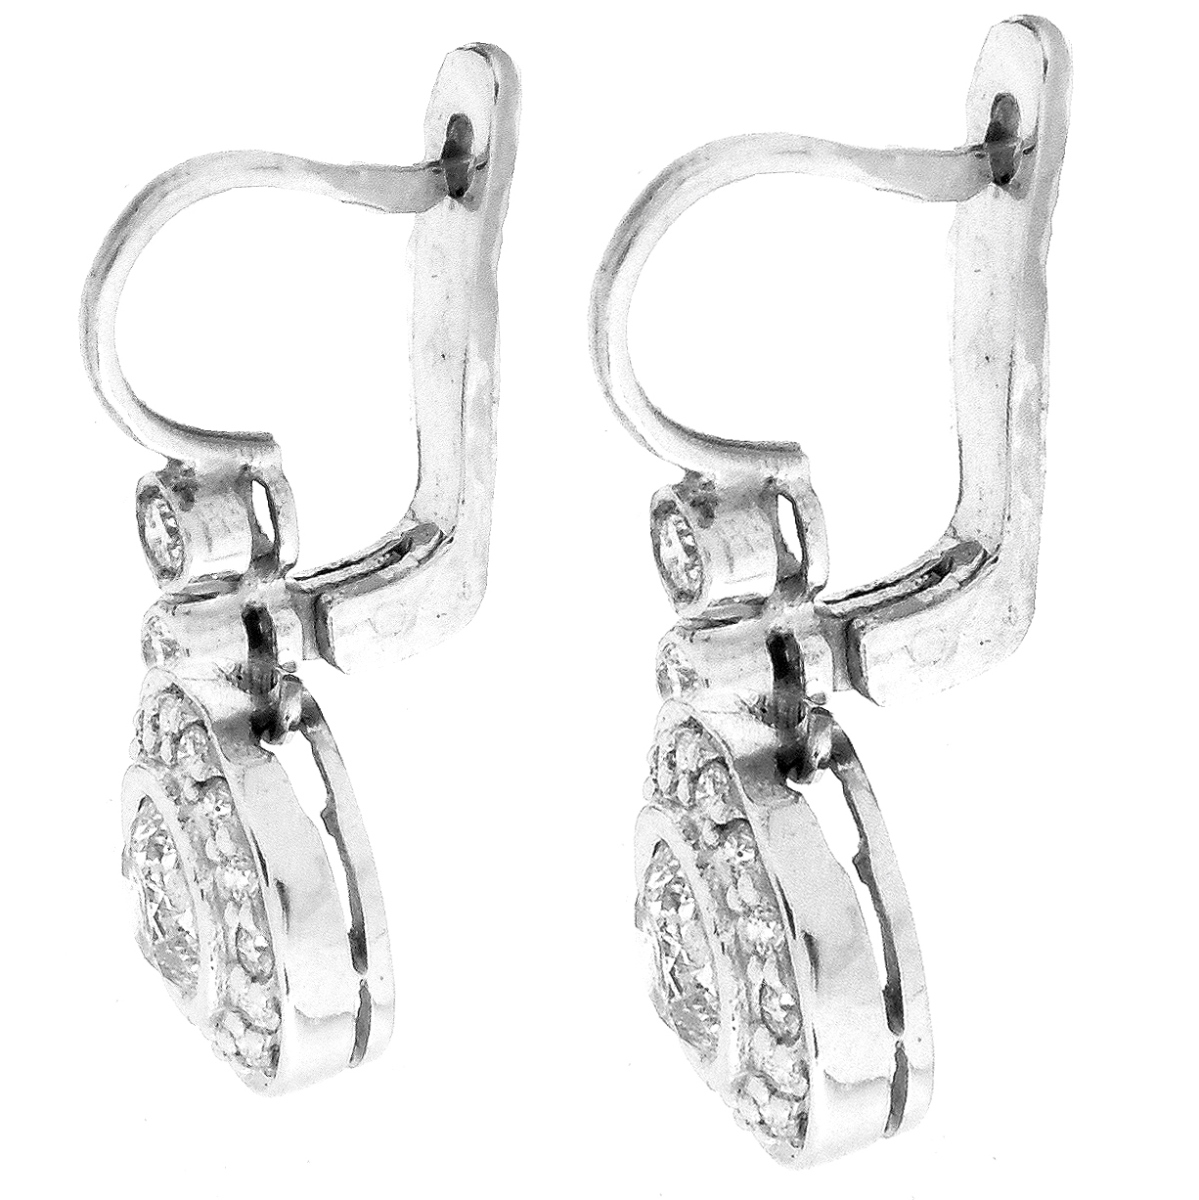 2.40ct TW Diamond and 14K Gold Earrings.